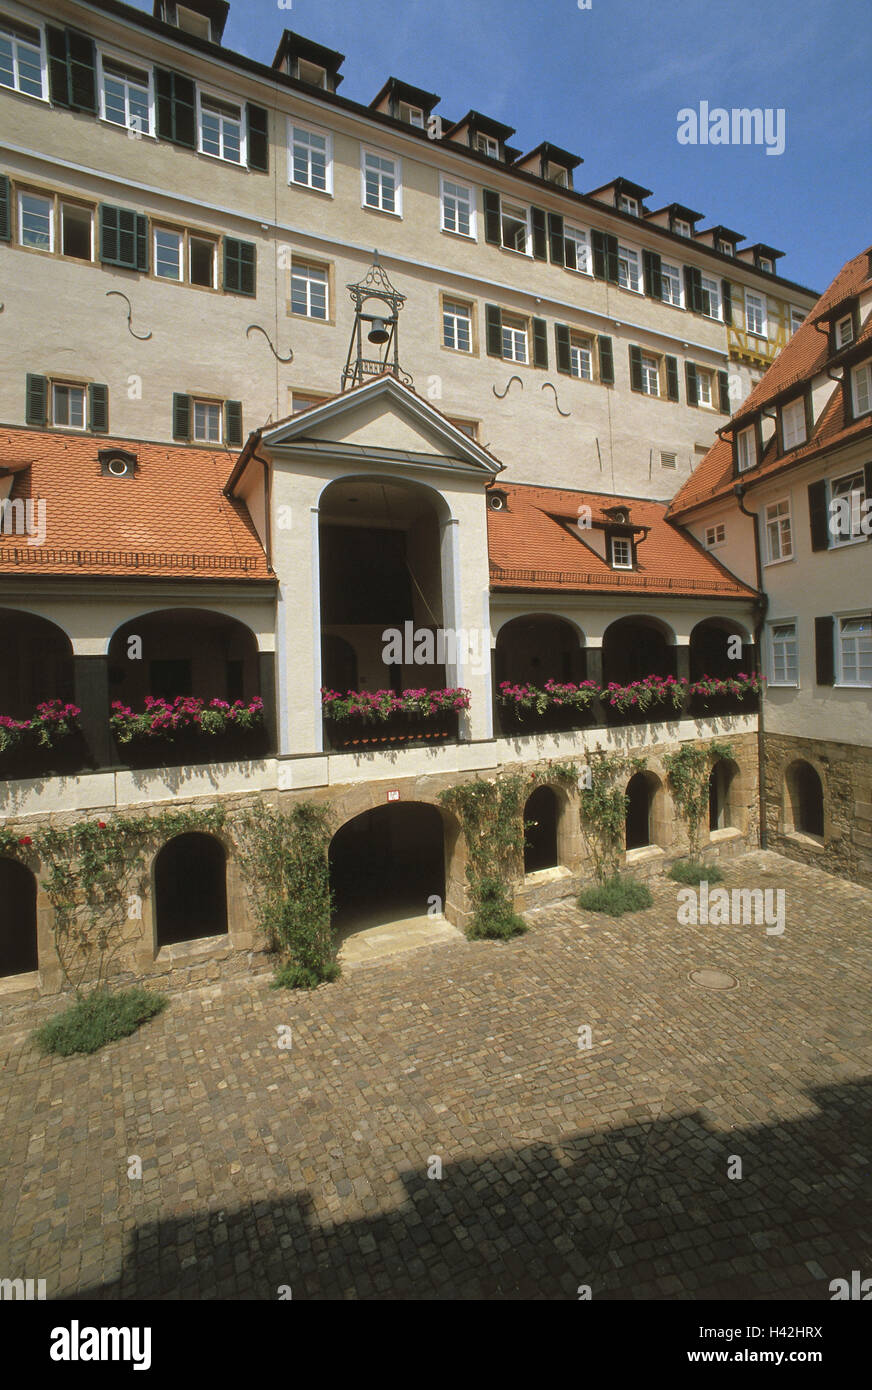 Germany, Baden-Wurttemberg, Tübingen, Protestant pen, inner courtyard, Europe, university town, town, study house, formerly, Augustinian's cloister, building, structure, architecture, culture, place of interest Stock Photo